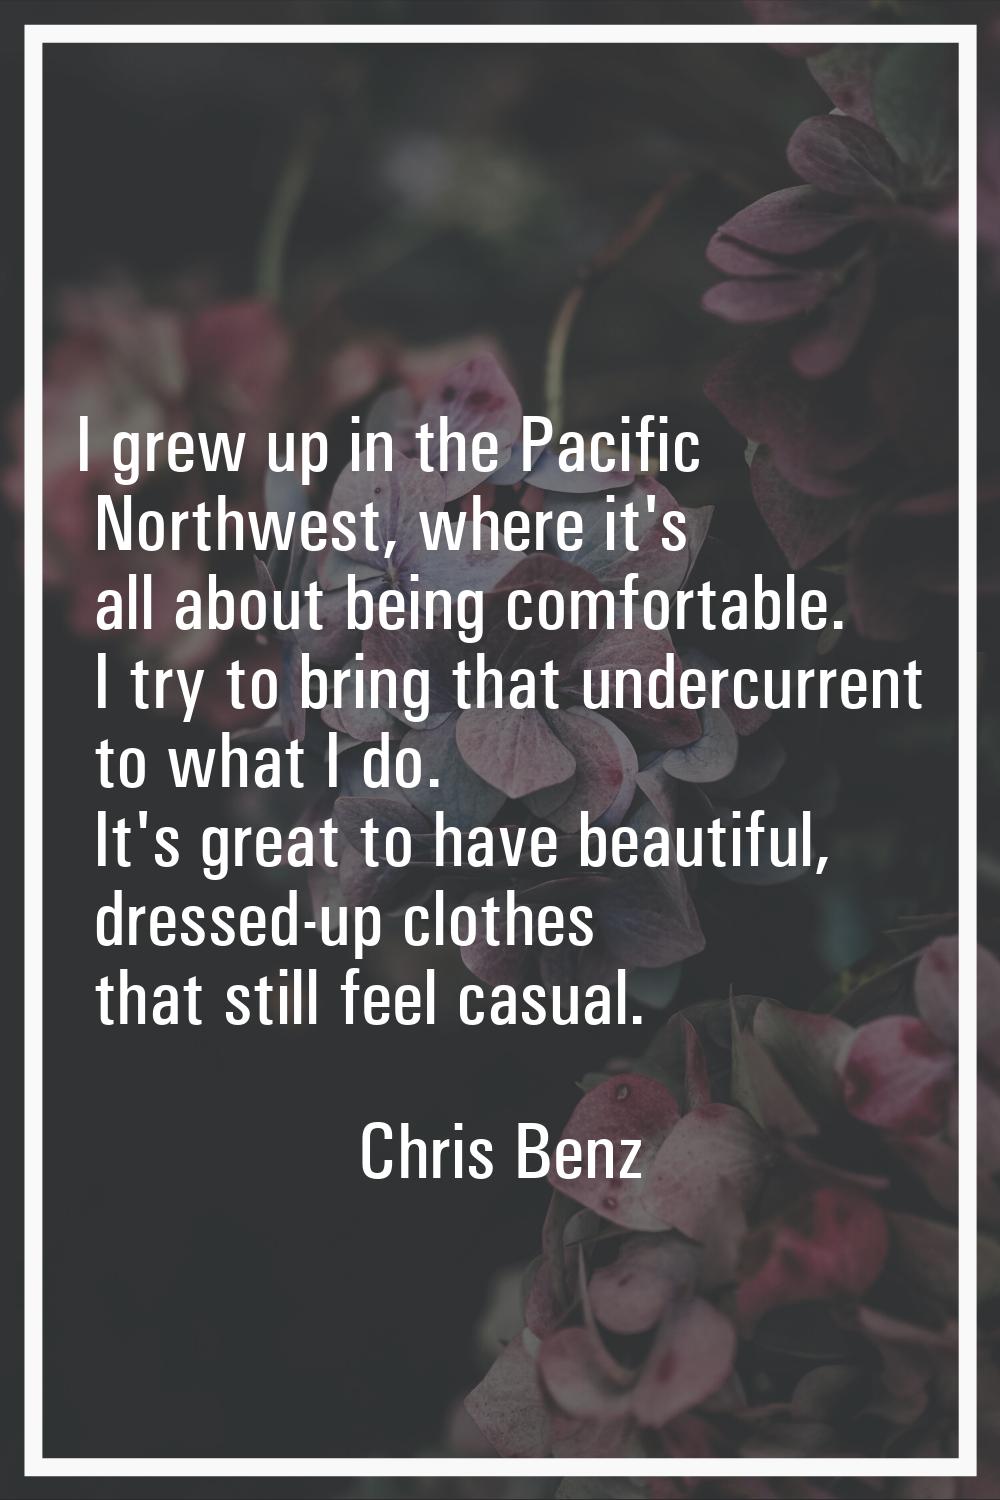 I grew up in the Pacific Northwest, where it's all about being comfortable. I try to bring that und